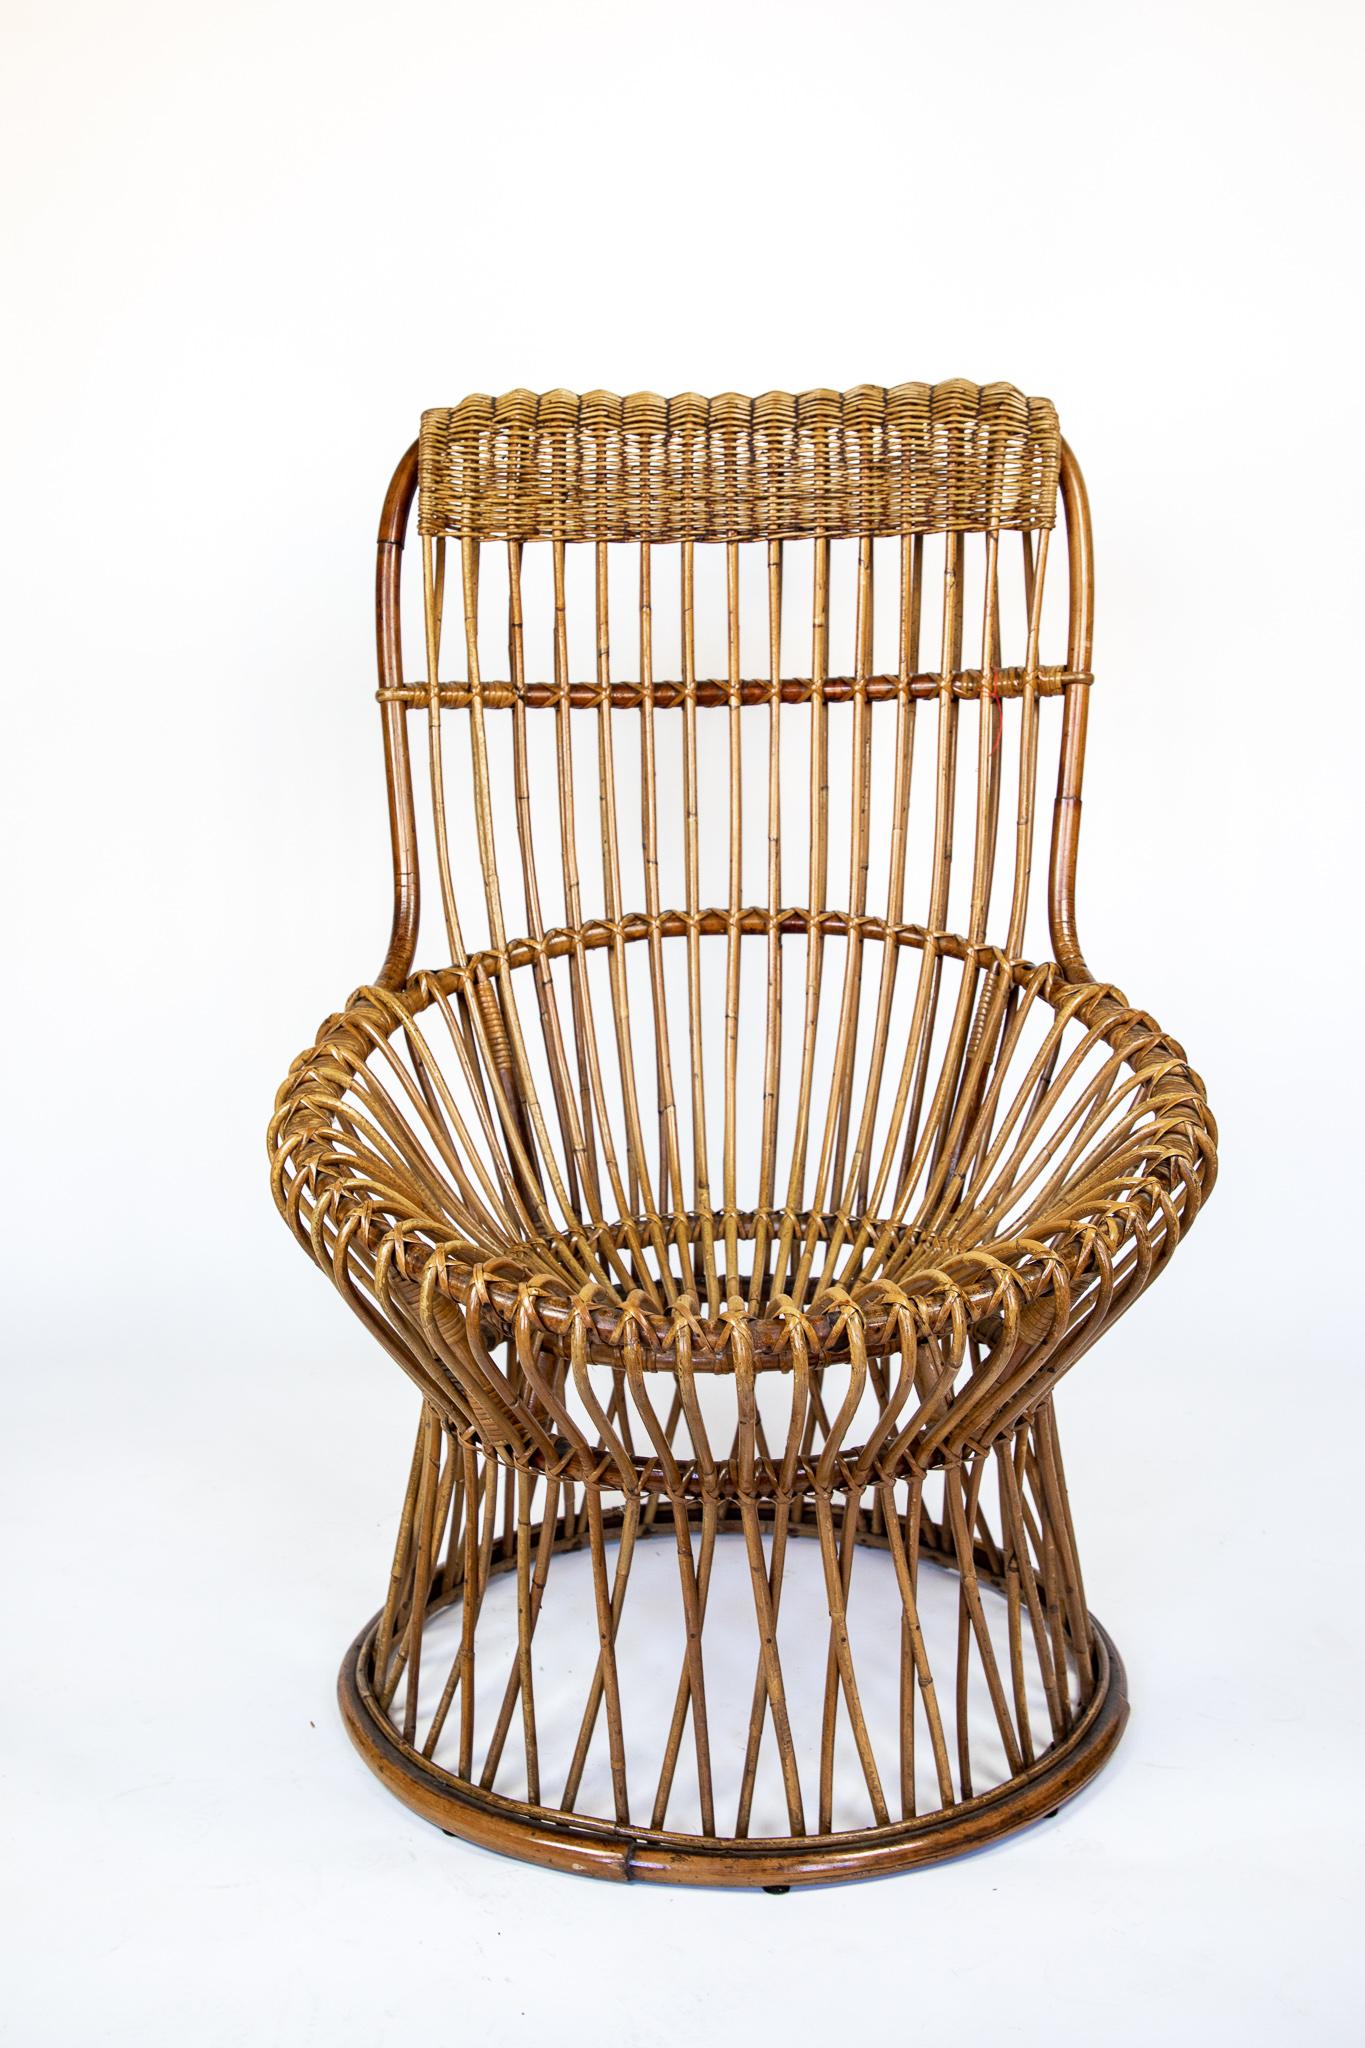 Mid Century Modern Lounge Chair in Rattan wicker, Italy 1950s.

Beautiful Italian mid-century rattan chair designed in the 1950s. This lounge chair was created to „suspend“ things and people. It offers a comfortable seating option to dream and rest.